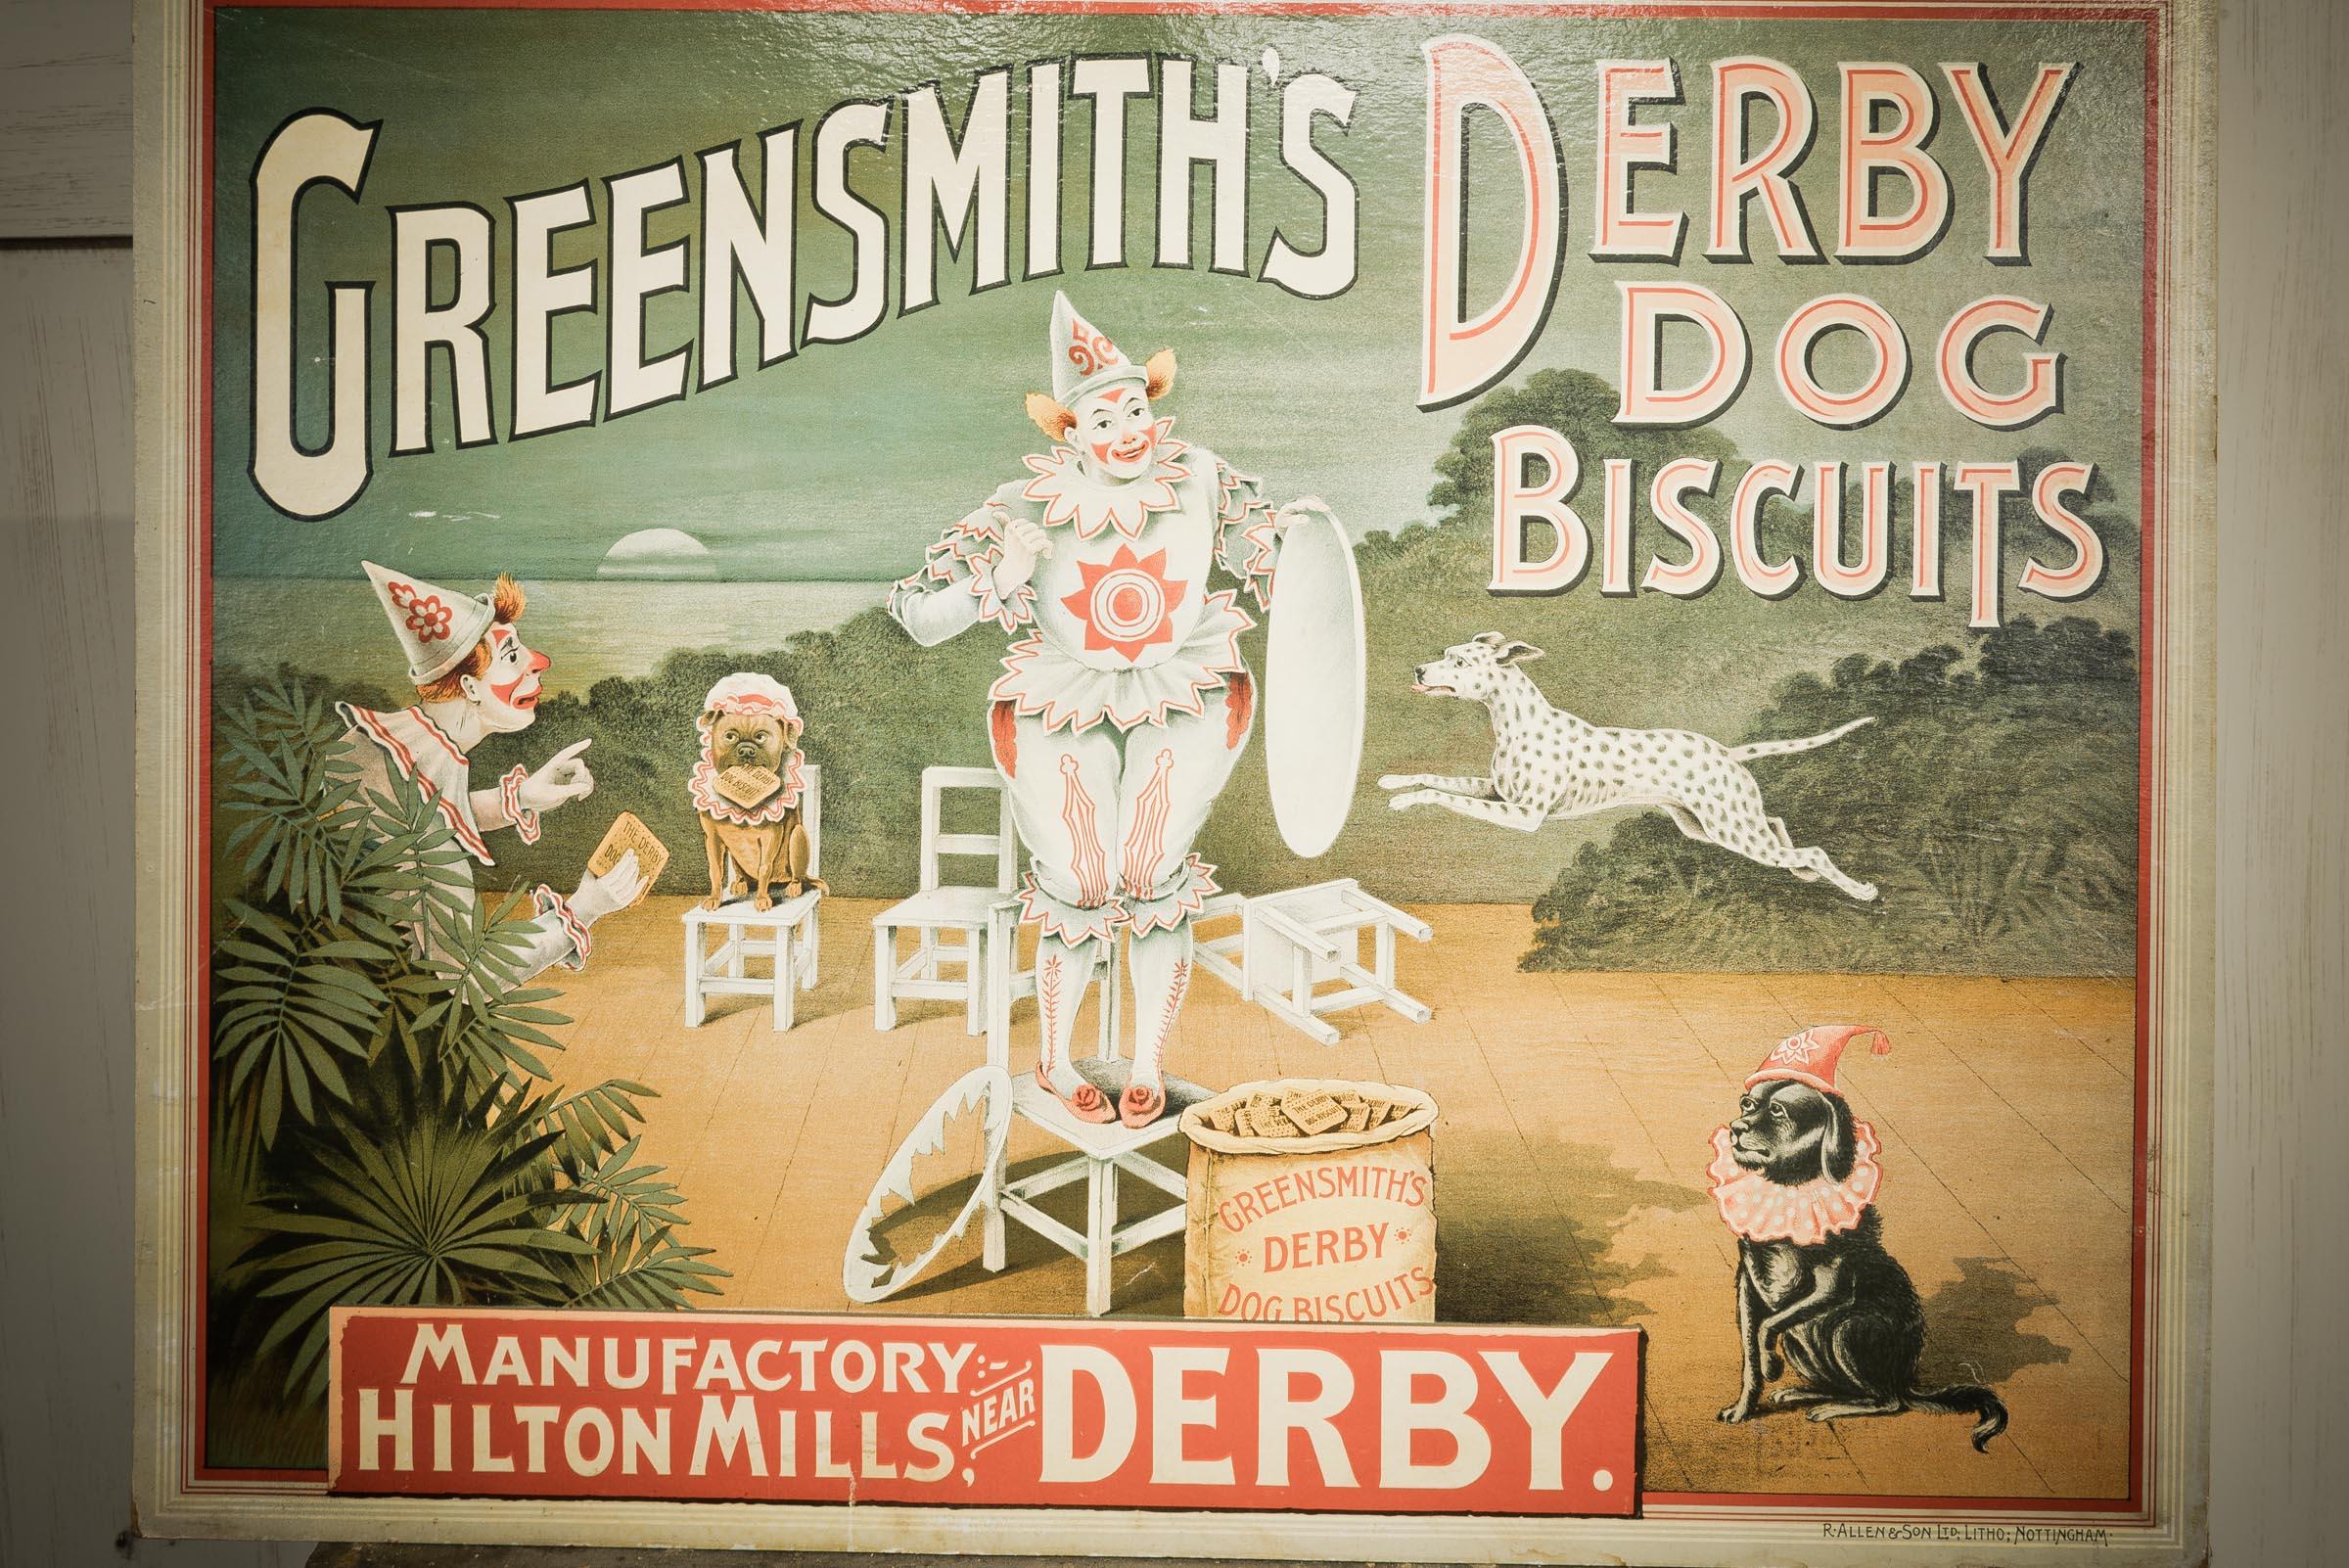 Wood A Victorian  advertising plaque representing Greensmith's Derby Dog biscuits.